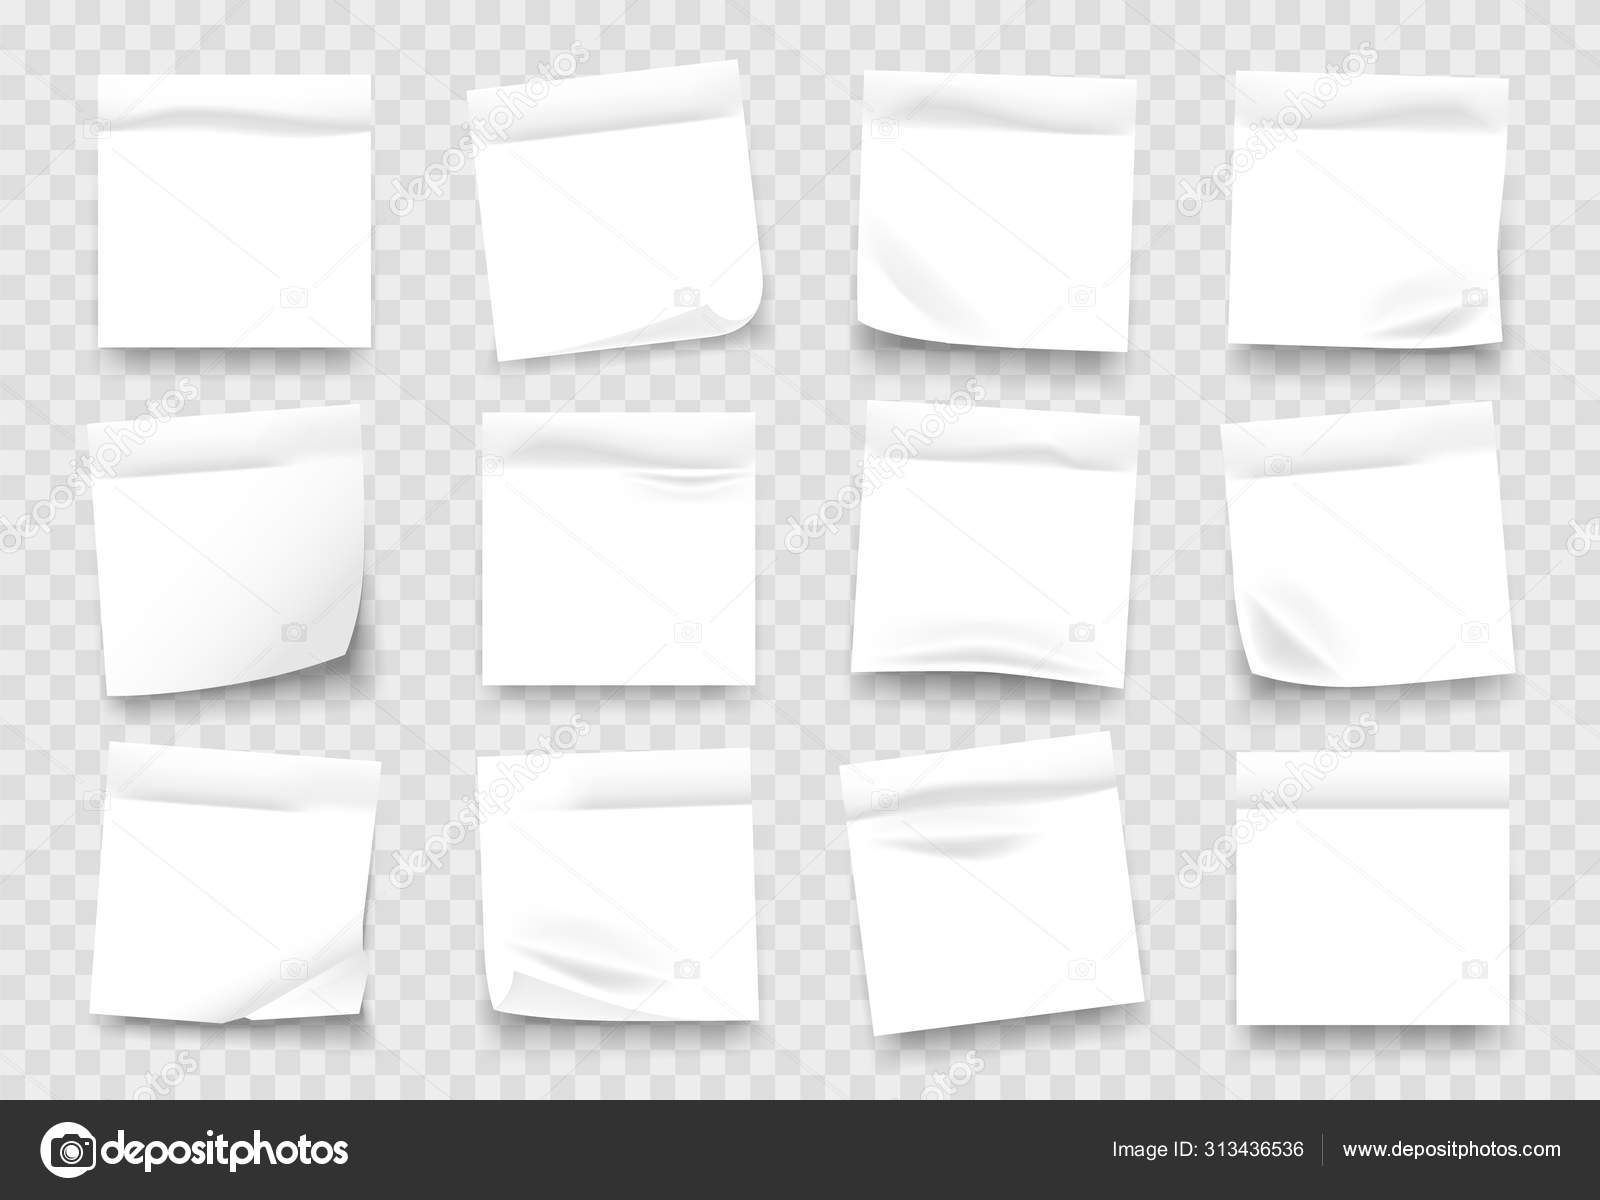 Sticky Notes White Notepad Sheets With Crumpled Edges Memos And Reminders Isolated On Transparent Background Vector Set Vector Image By C Spicytruffel Vector Stock